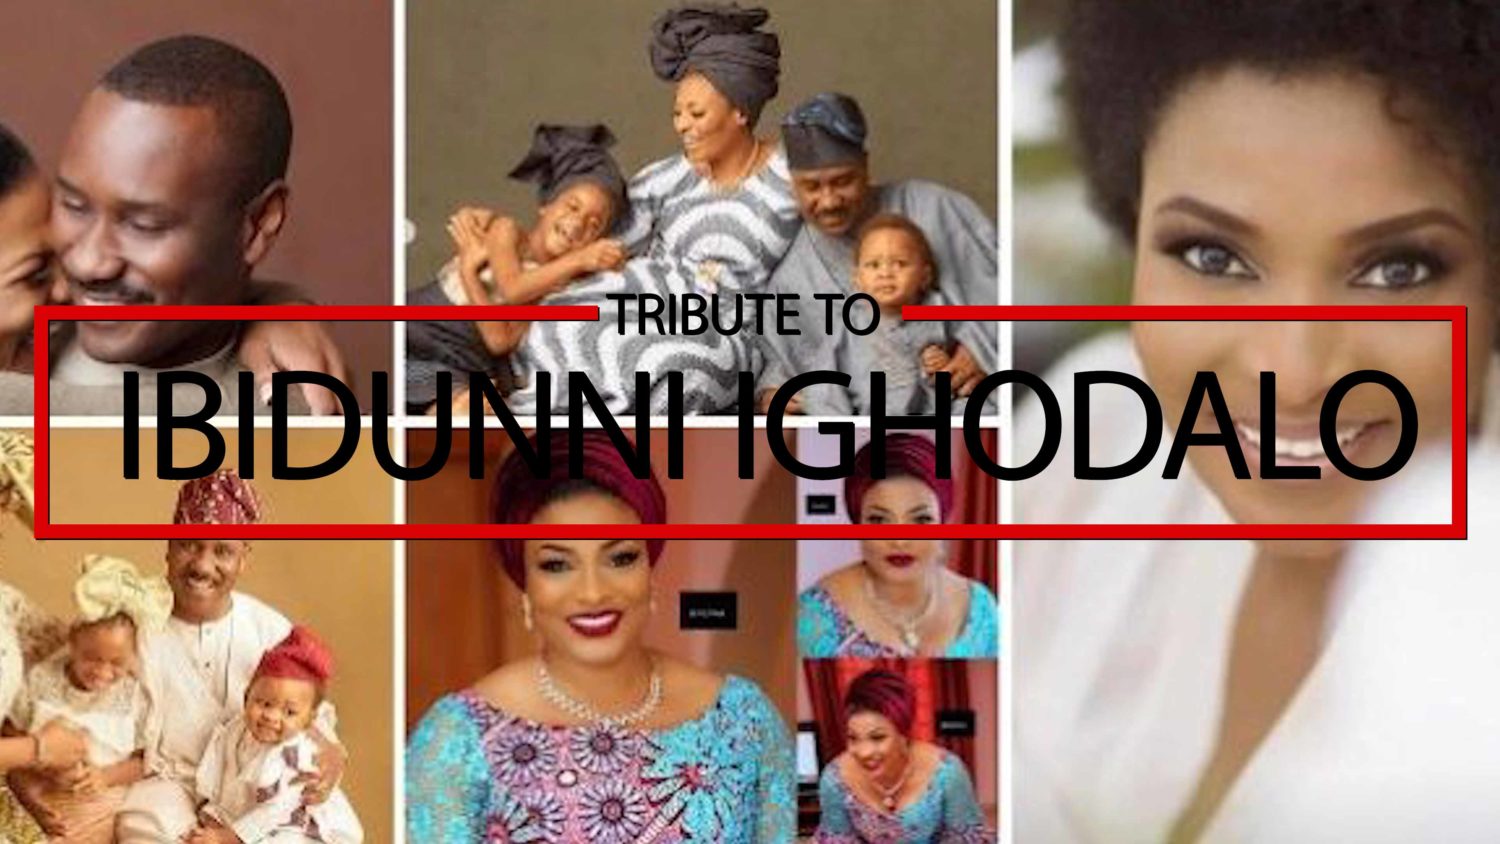 Ighodalo Revealed: Ibidunni’s mother planned house gift for daughter’s 40th birthday